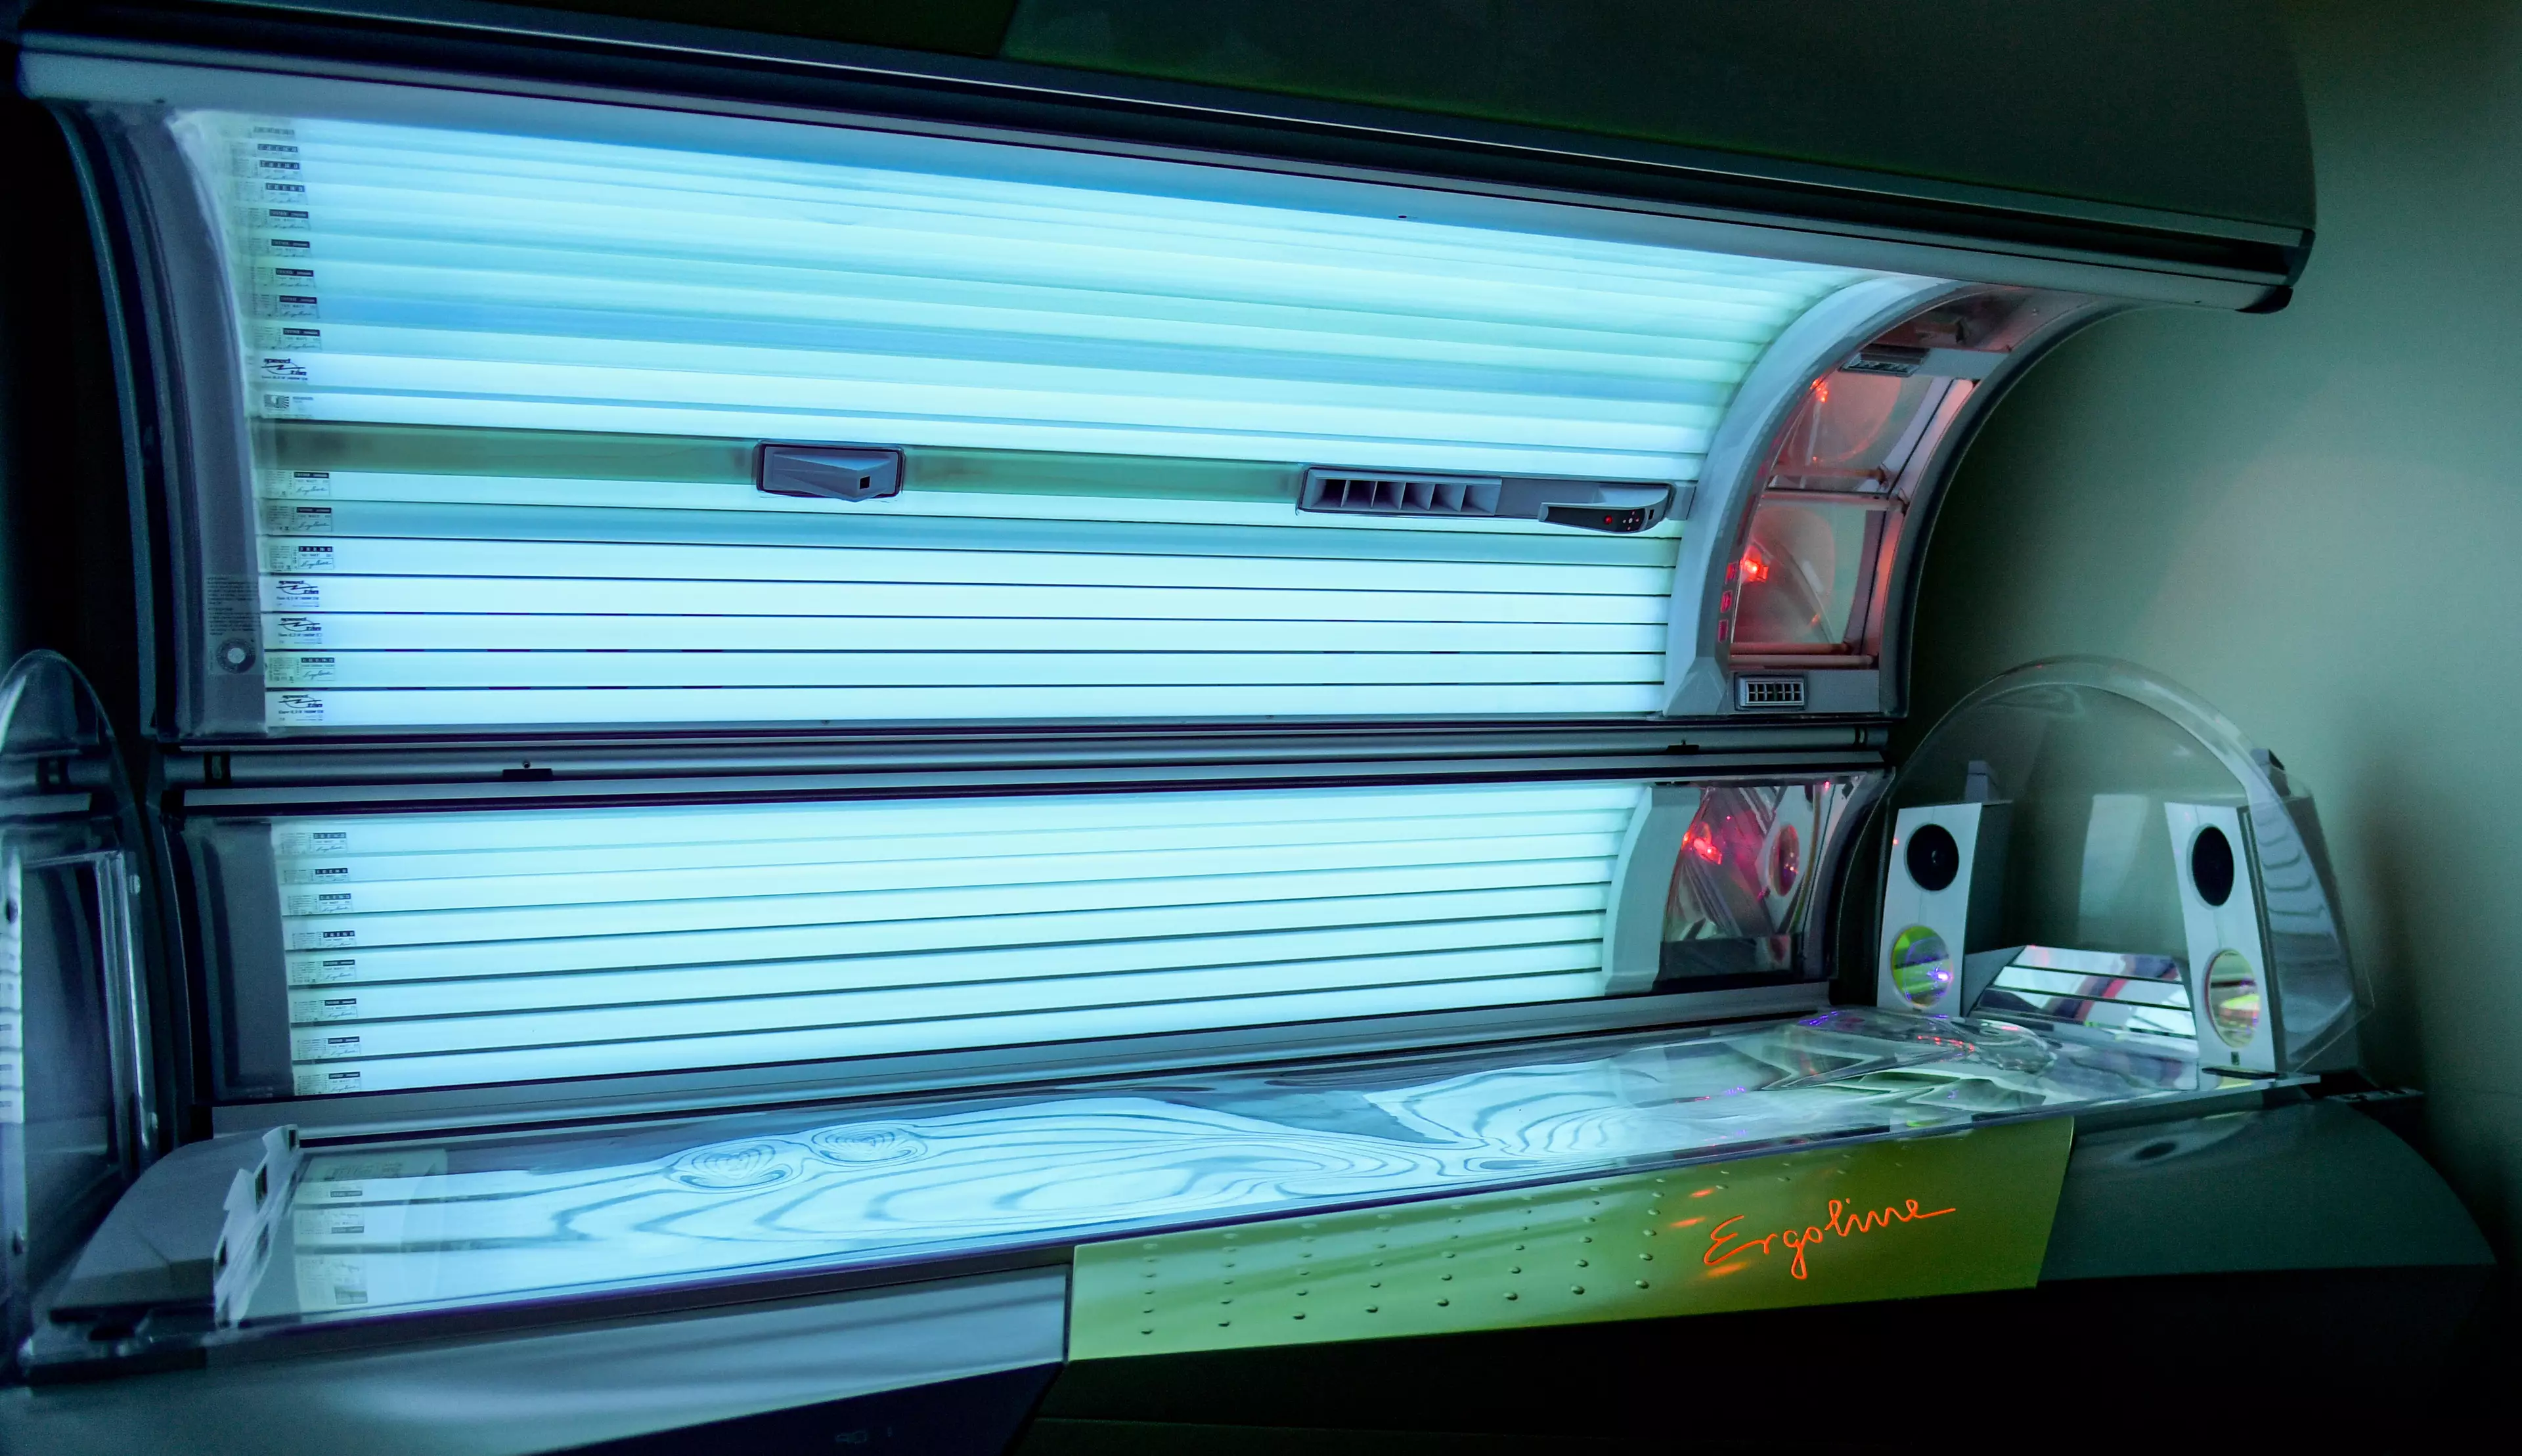 Tanning beds could potentially lead to endometriosis (